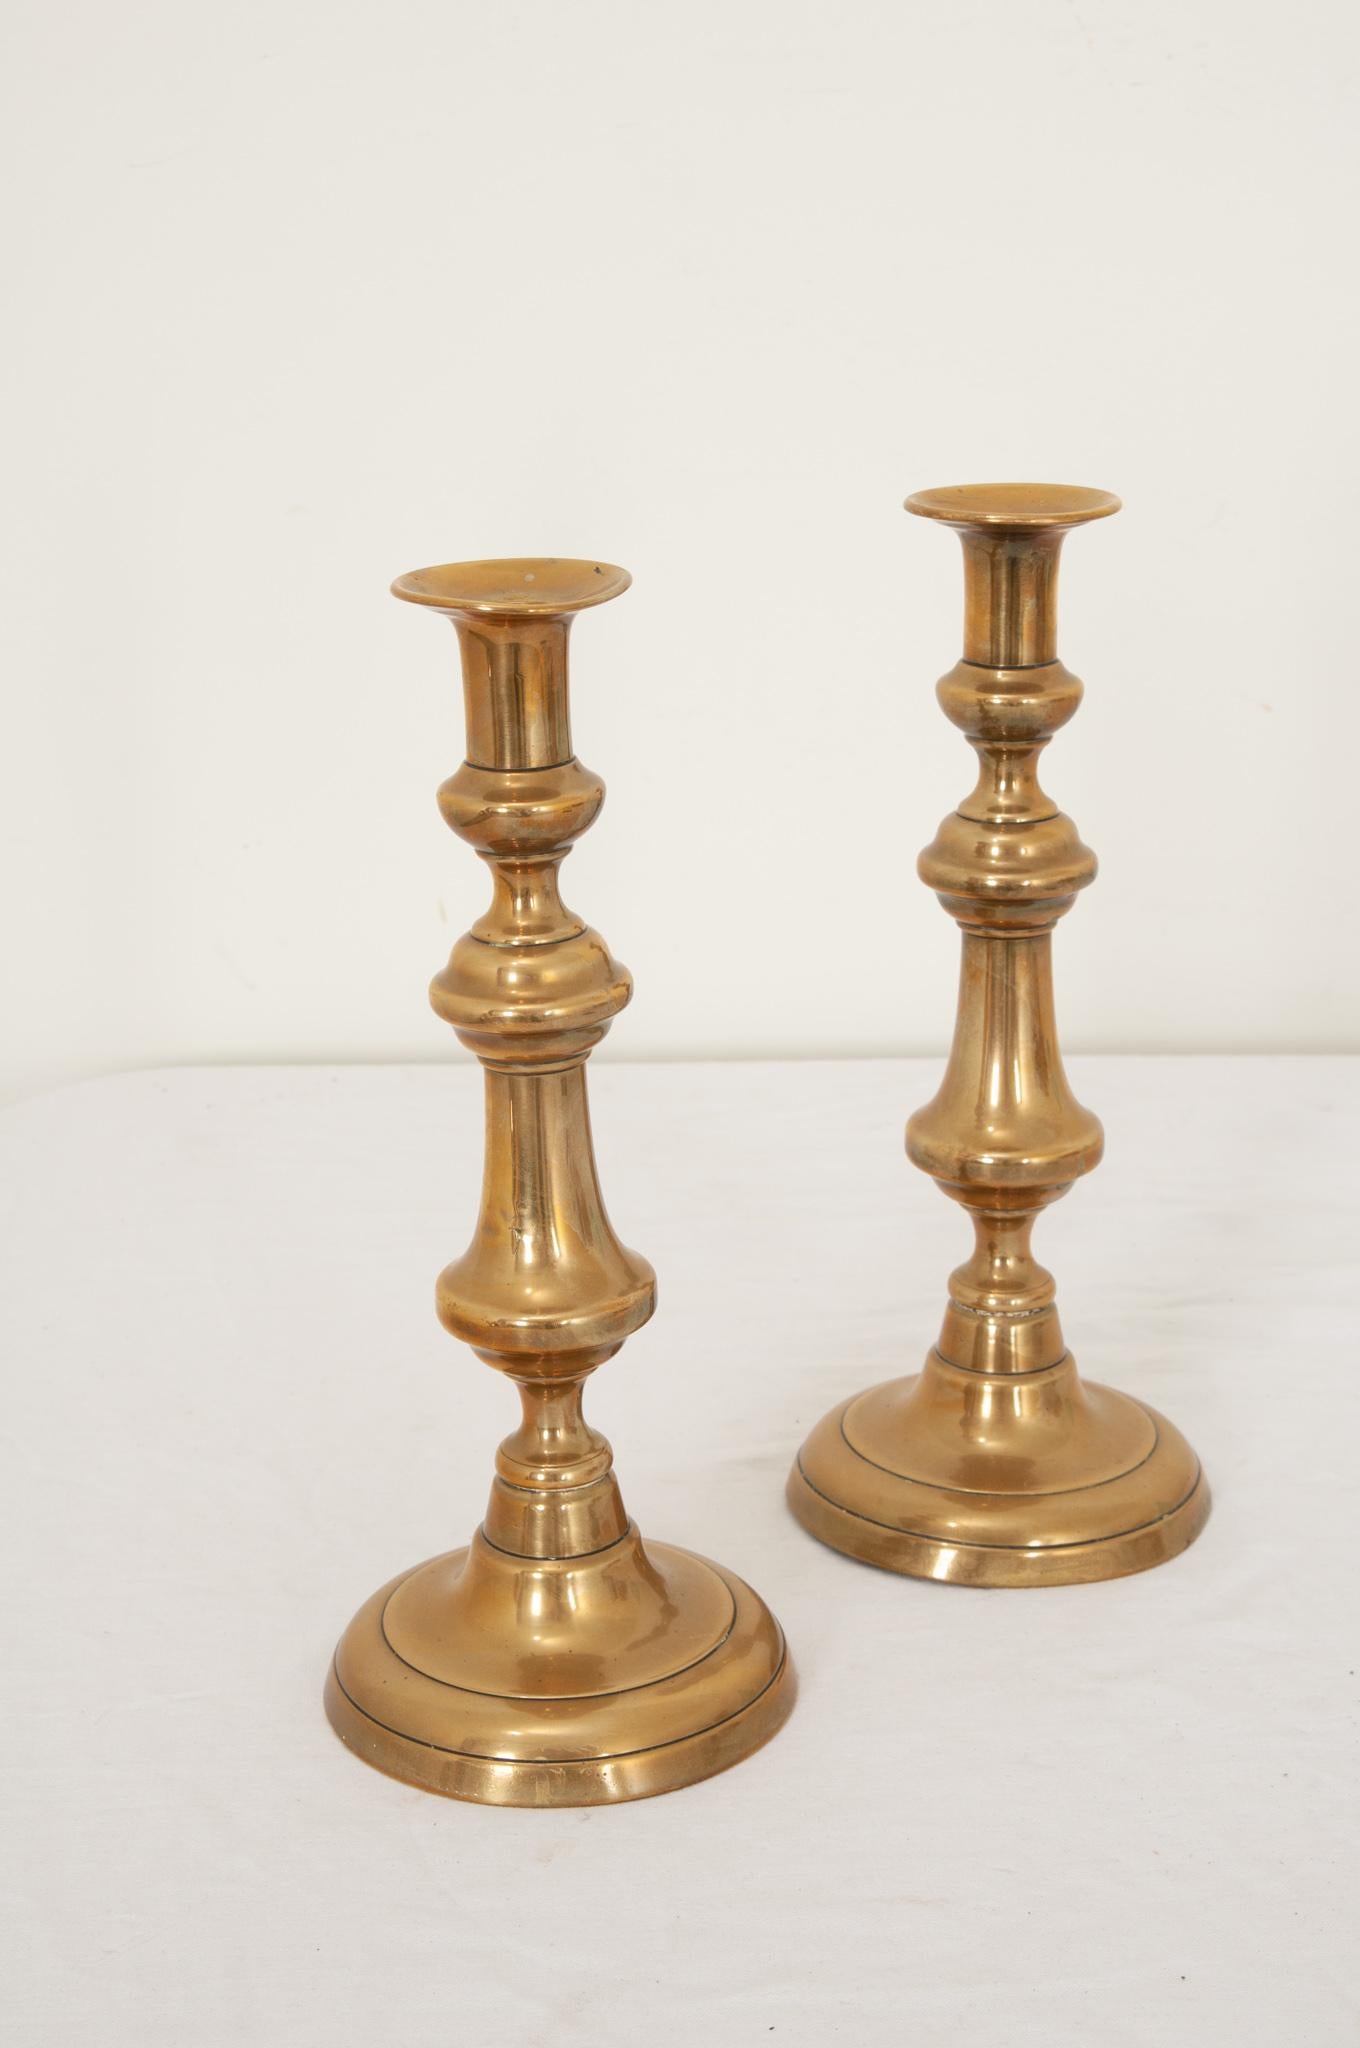 Pair of antique solid brass candlesticks. Finely crafted turned spindles give this pair a look of beautiful classic style and simplicity. Heavy with a smooth patina this set would be perfect to flank artwork or for table illumination. Be sure to